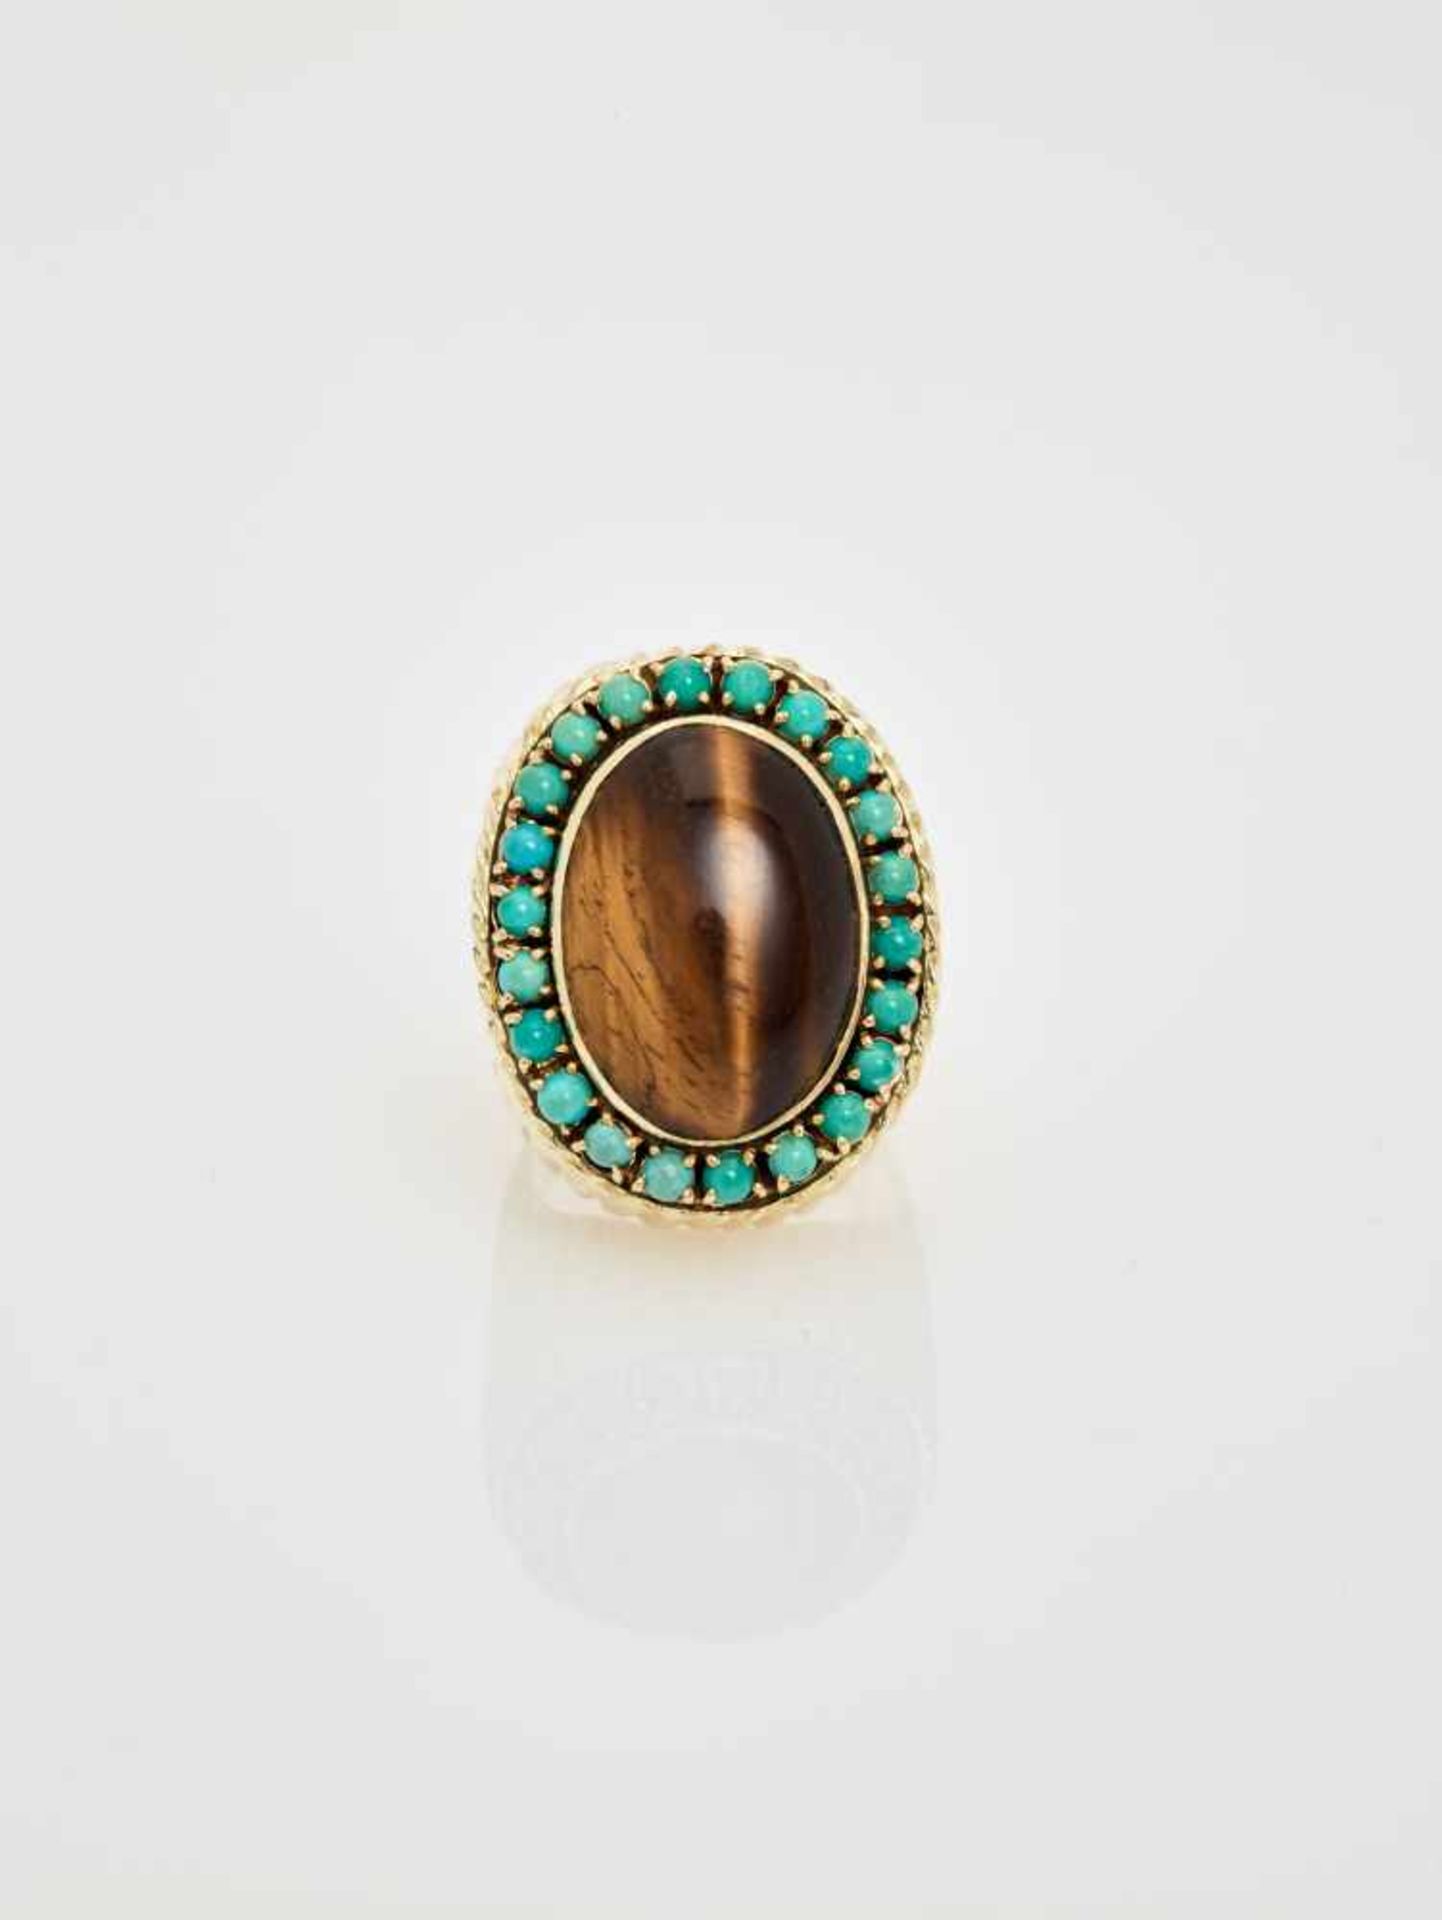 A TIGER’S EYE AND TURQUOISE 14 CARAT YELLOW GOLD COCKTAIL RINGAustriaAttributed to Erwin Paltscho, - Image 2 of 7